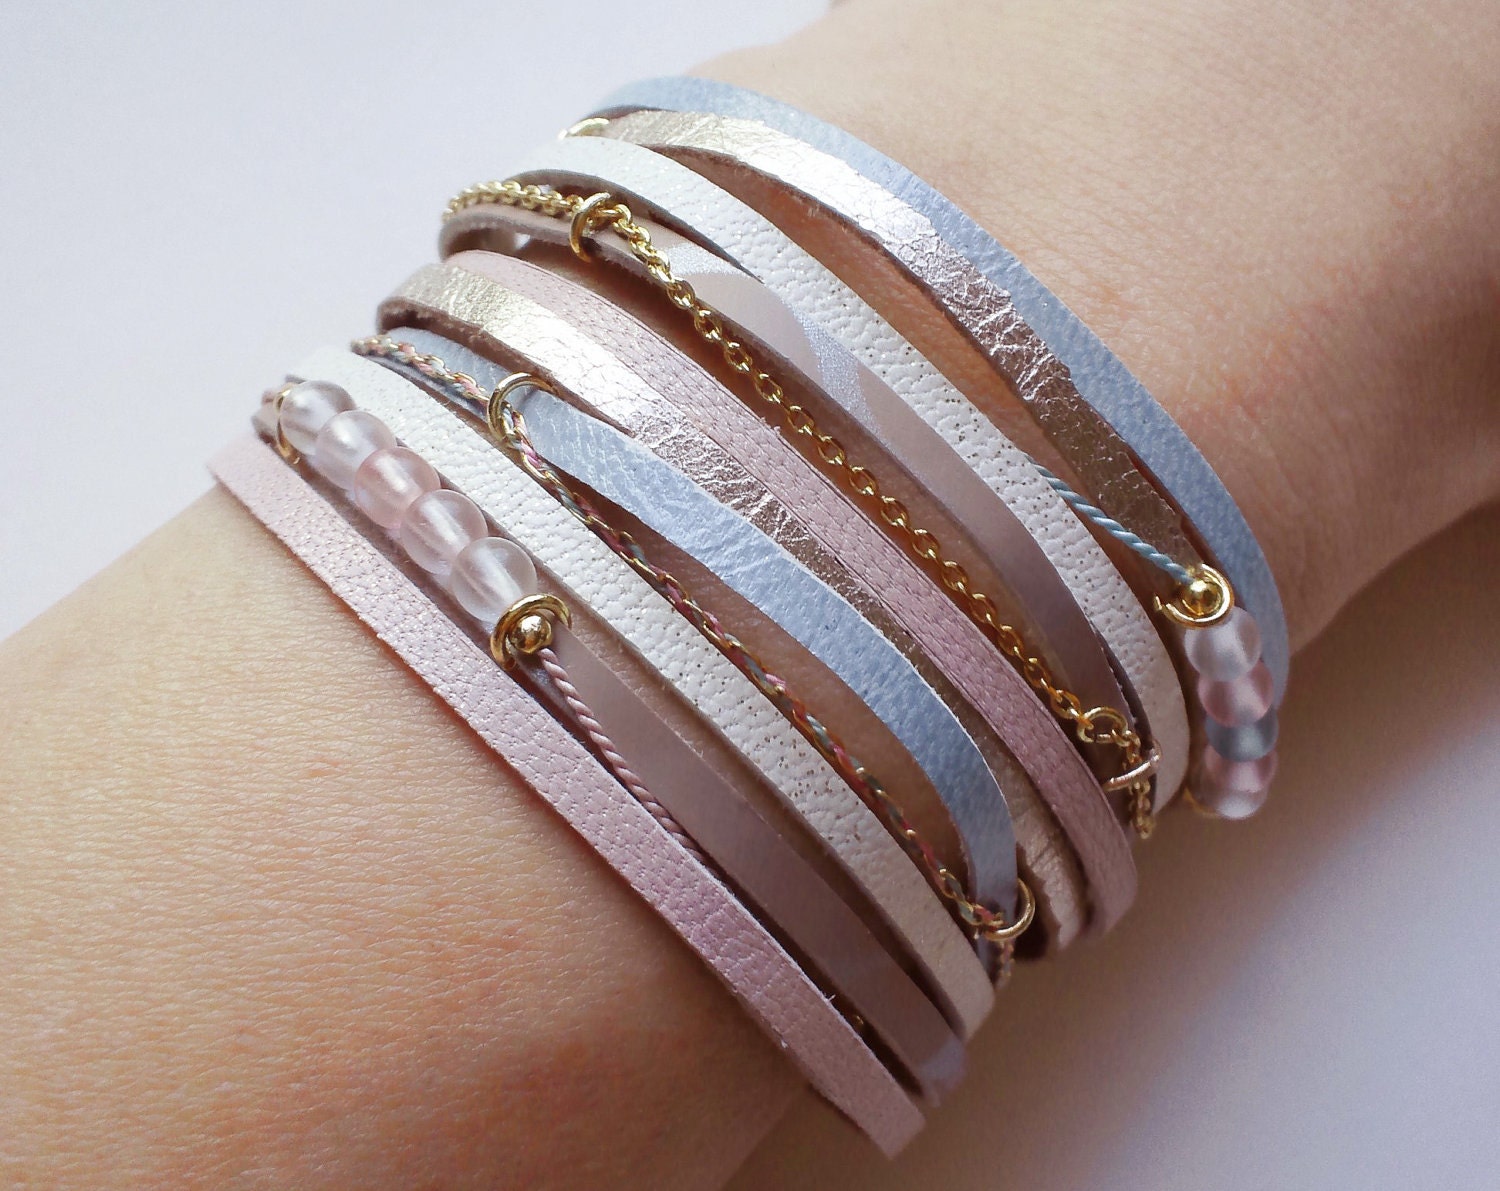 50 % off SALE - layered cuff bracelet with leather, chain, strings & beads in pastel colors- LIKE QUOLIAL on Facebook and get free shipping - QUOLIAL